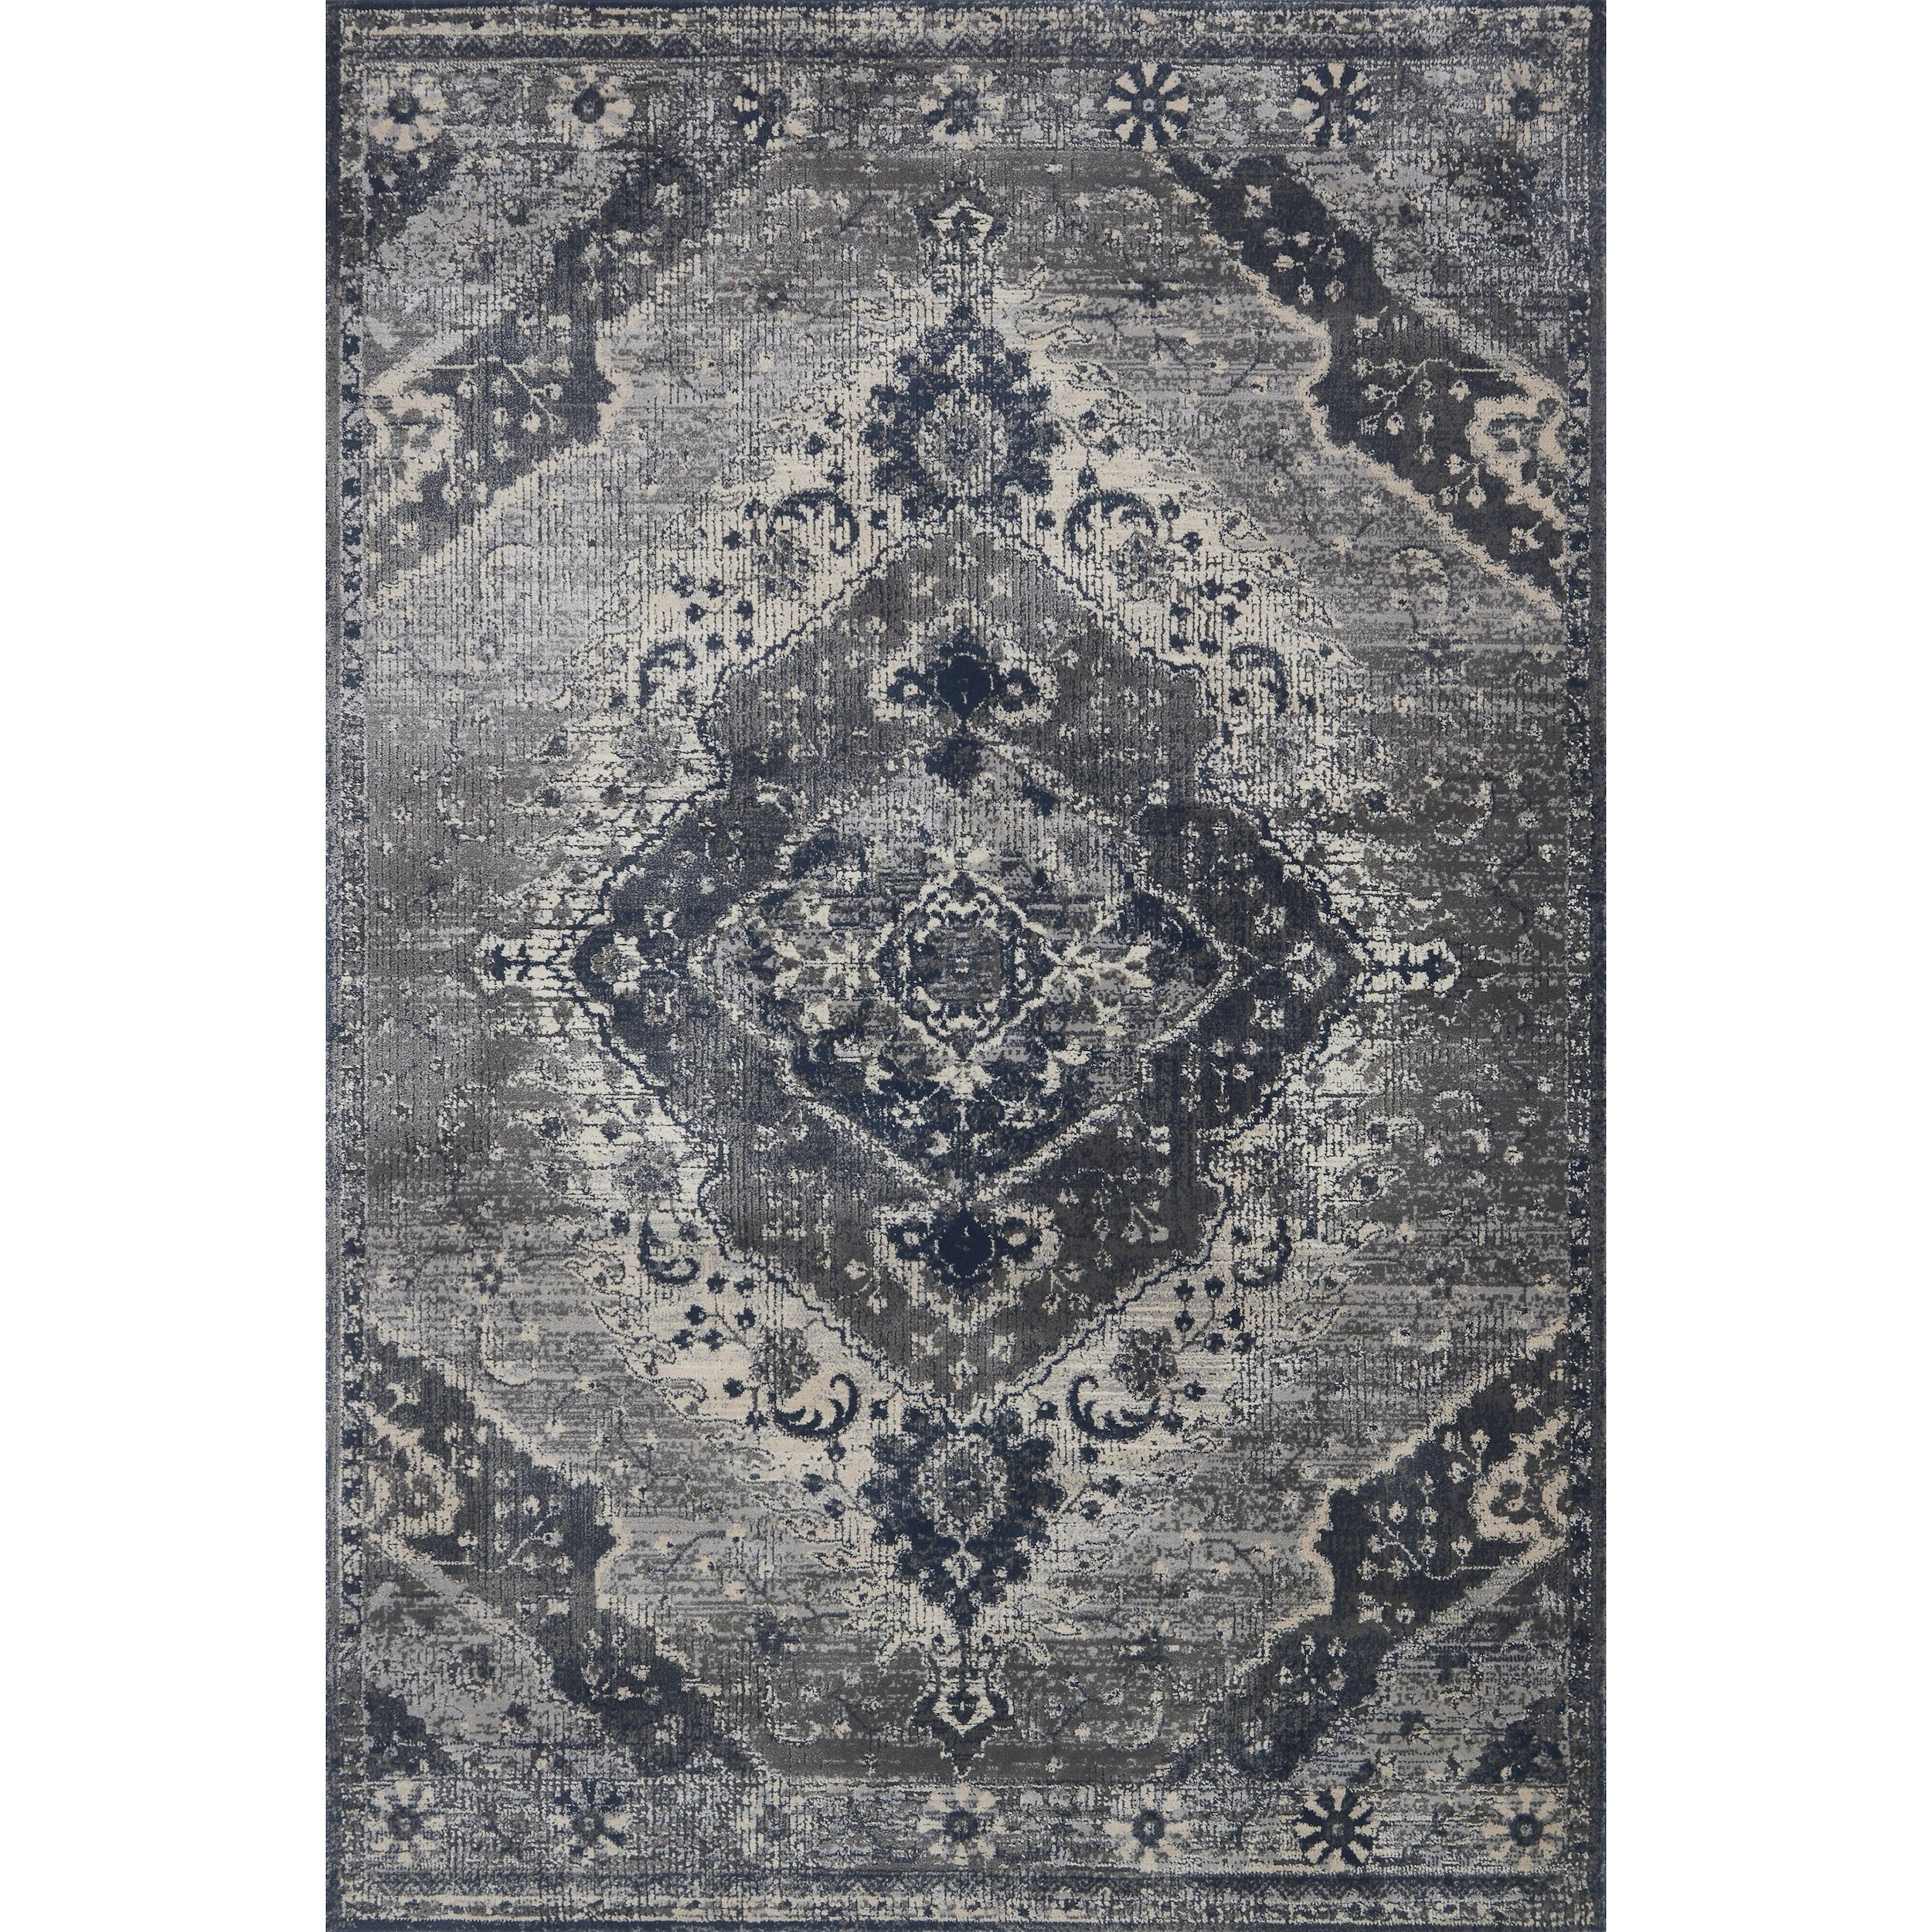 dark grey and silver rug with traditional pattern Items range from $249.00 to $2499.00